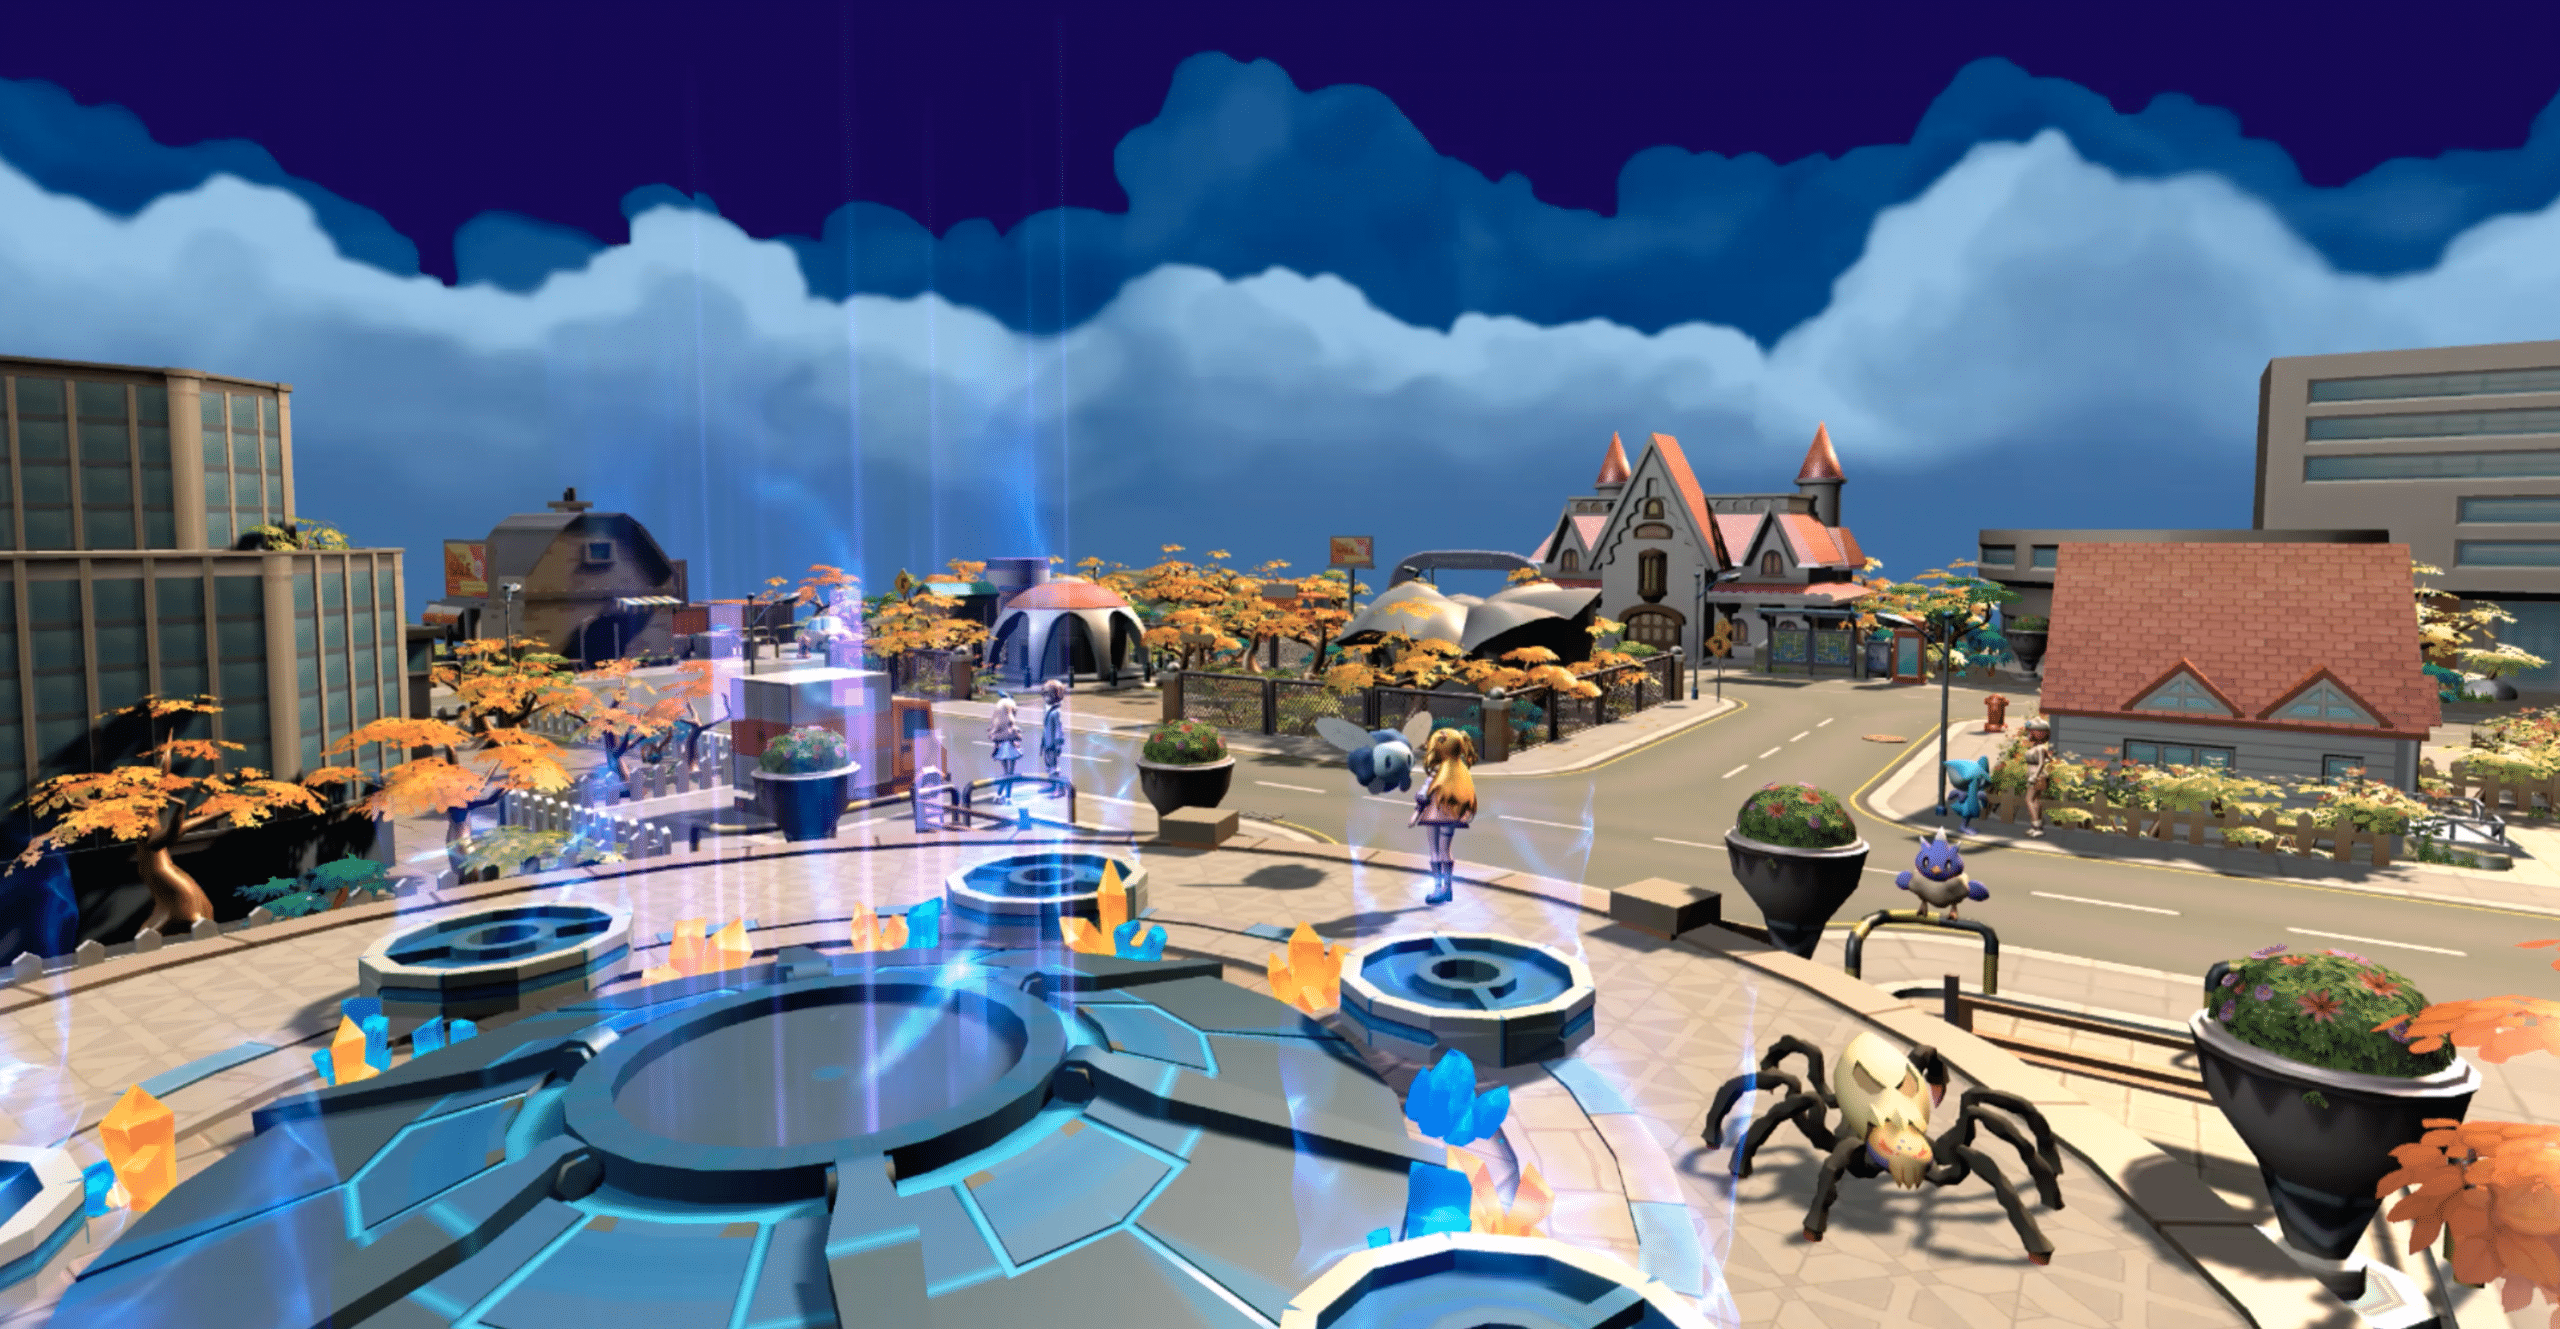 The Revomon NFT virtual world is bustling with excitement in this preview image.